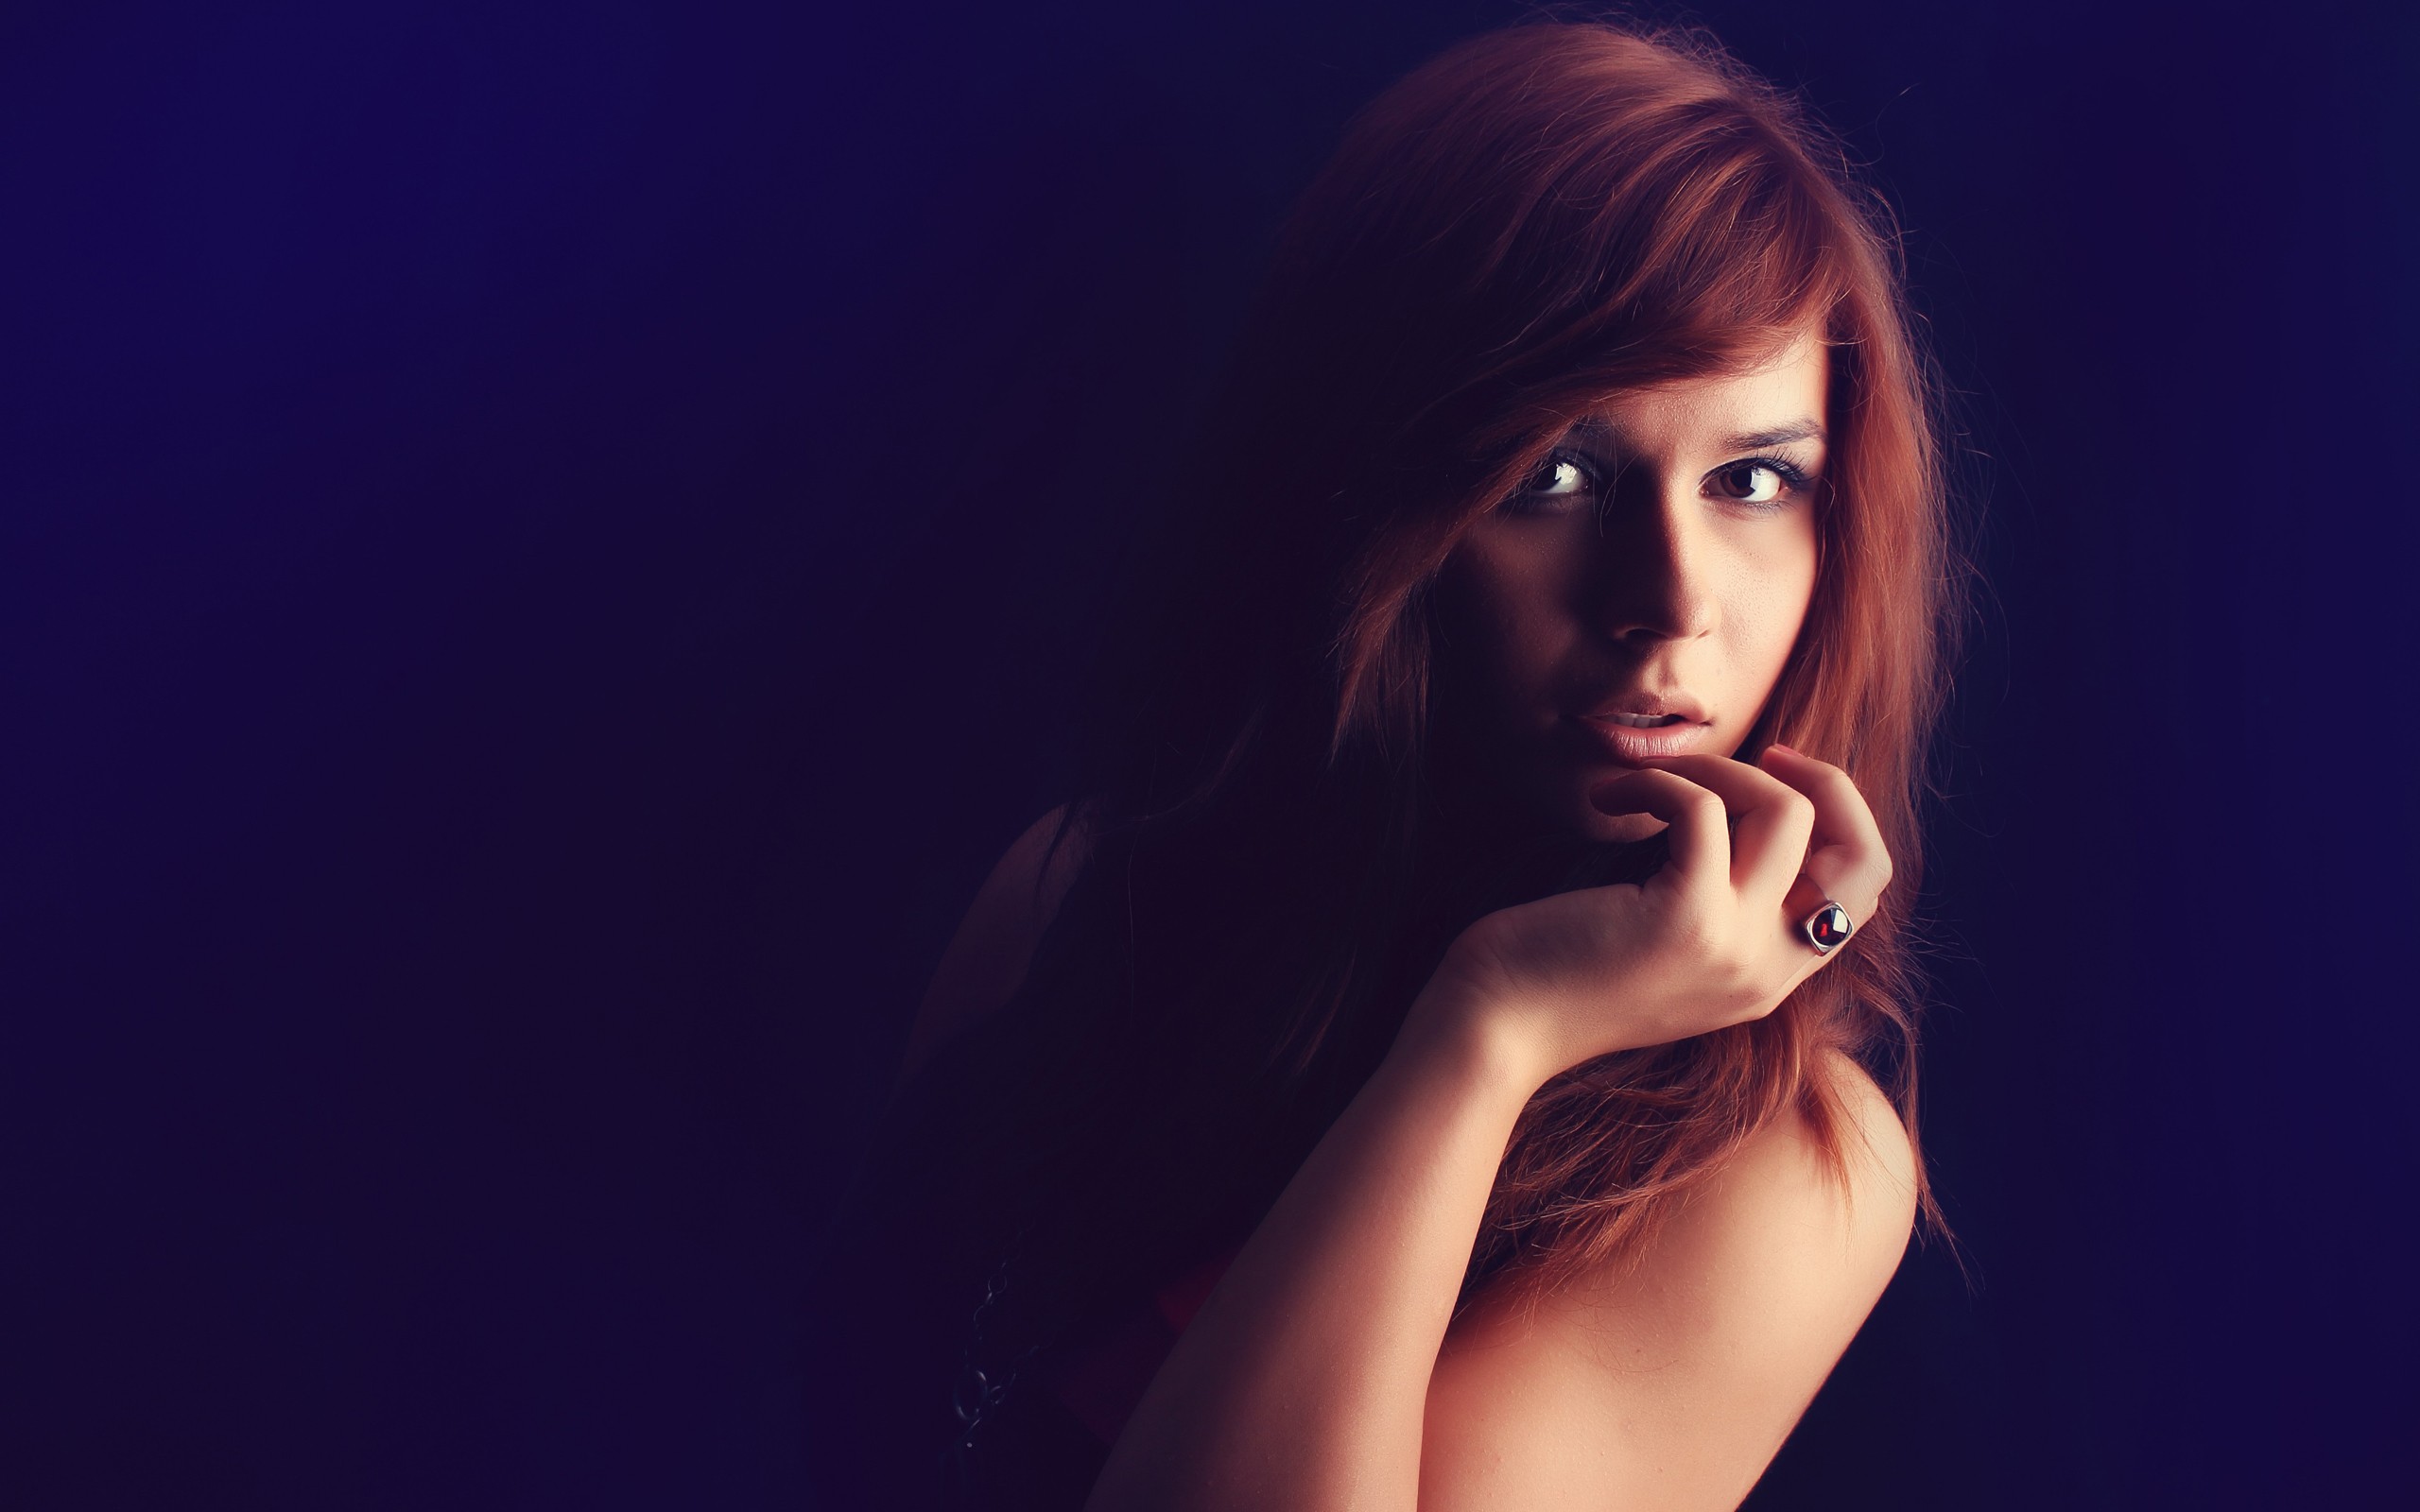 women, Redheads, Rings, Blurred, Finger, In, Mouth, Blue, Background Wallpaper